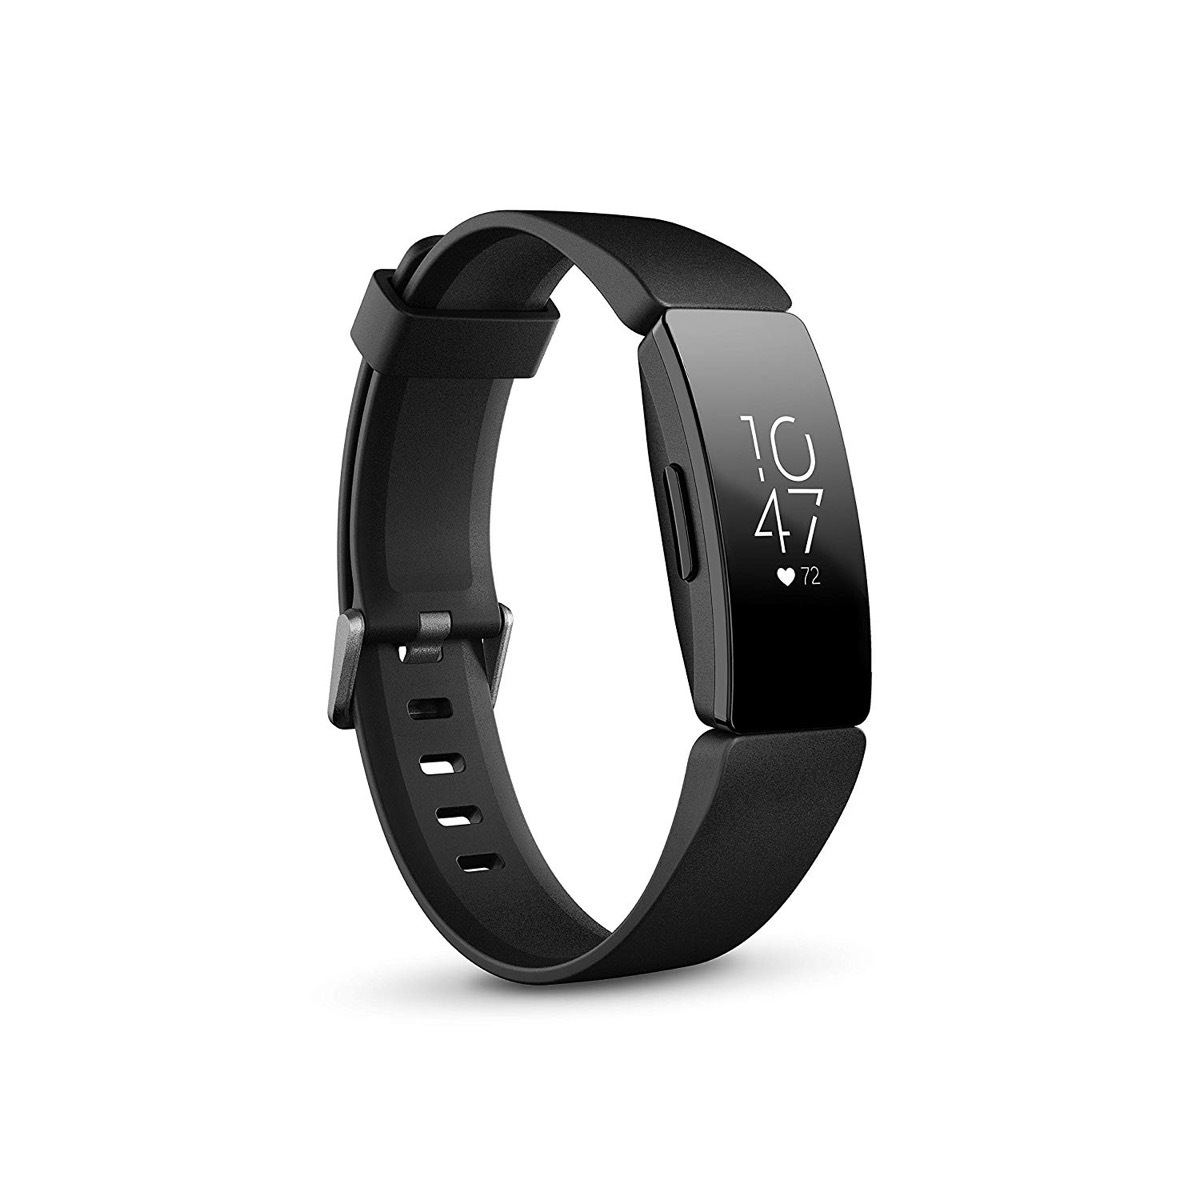 black fitbit fitness tracker on white background